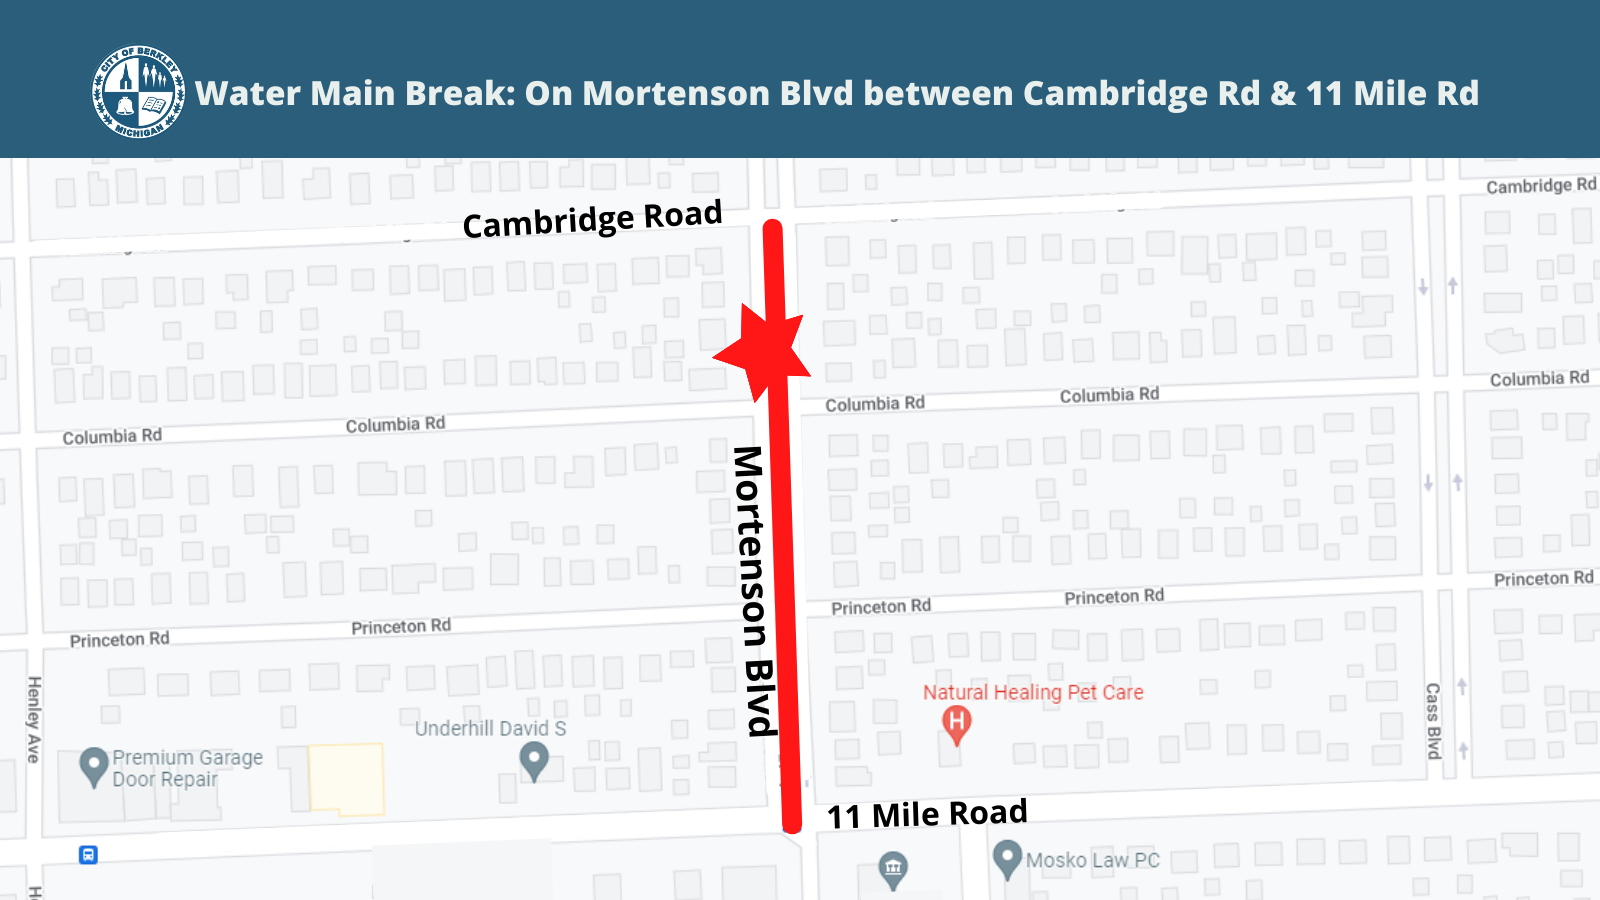 Water Main Break Map_On Mortenson between Cambridge Rd and 11 Mile Rd